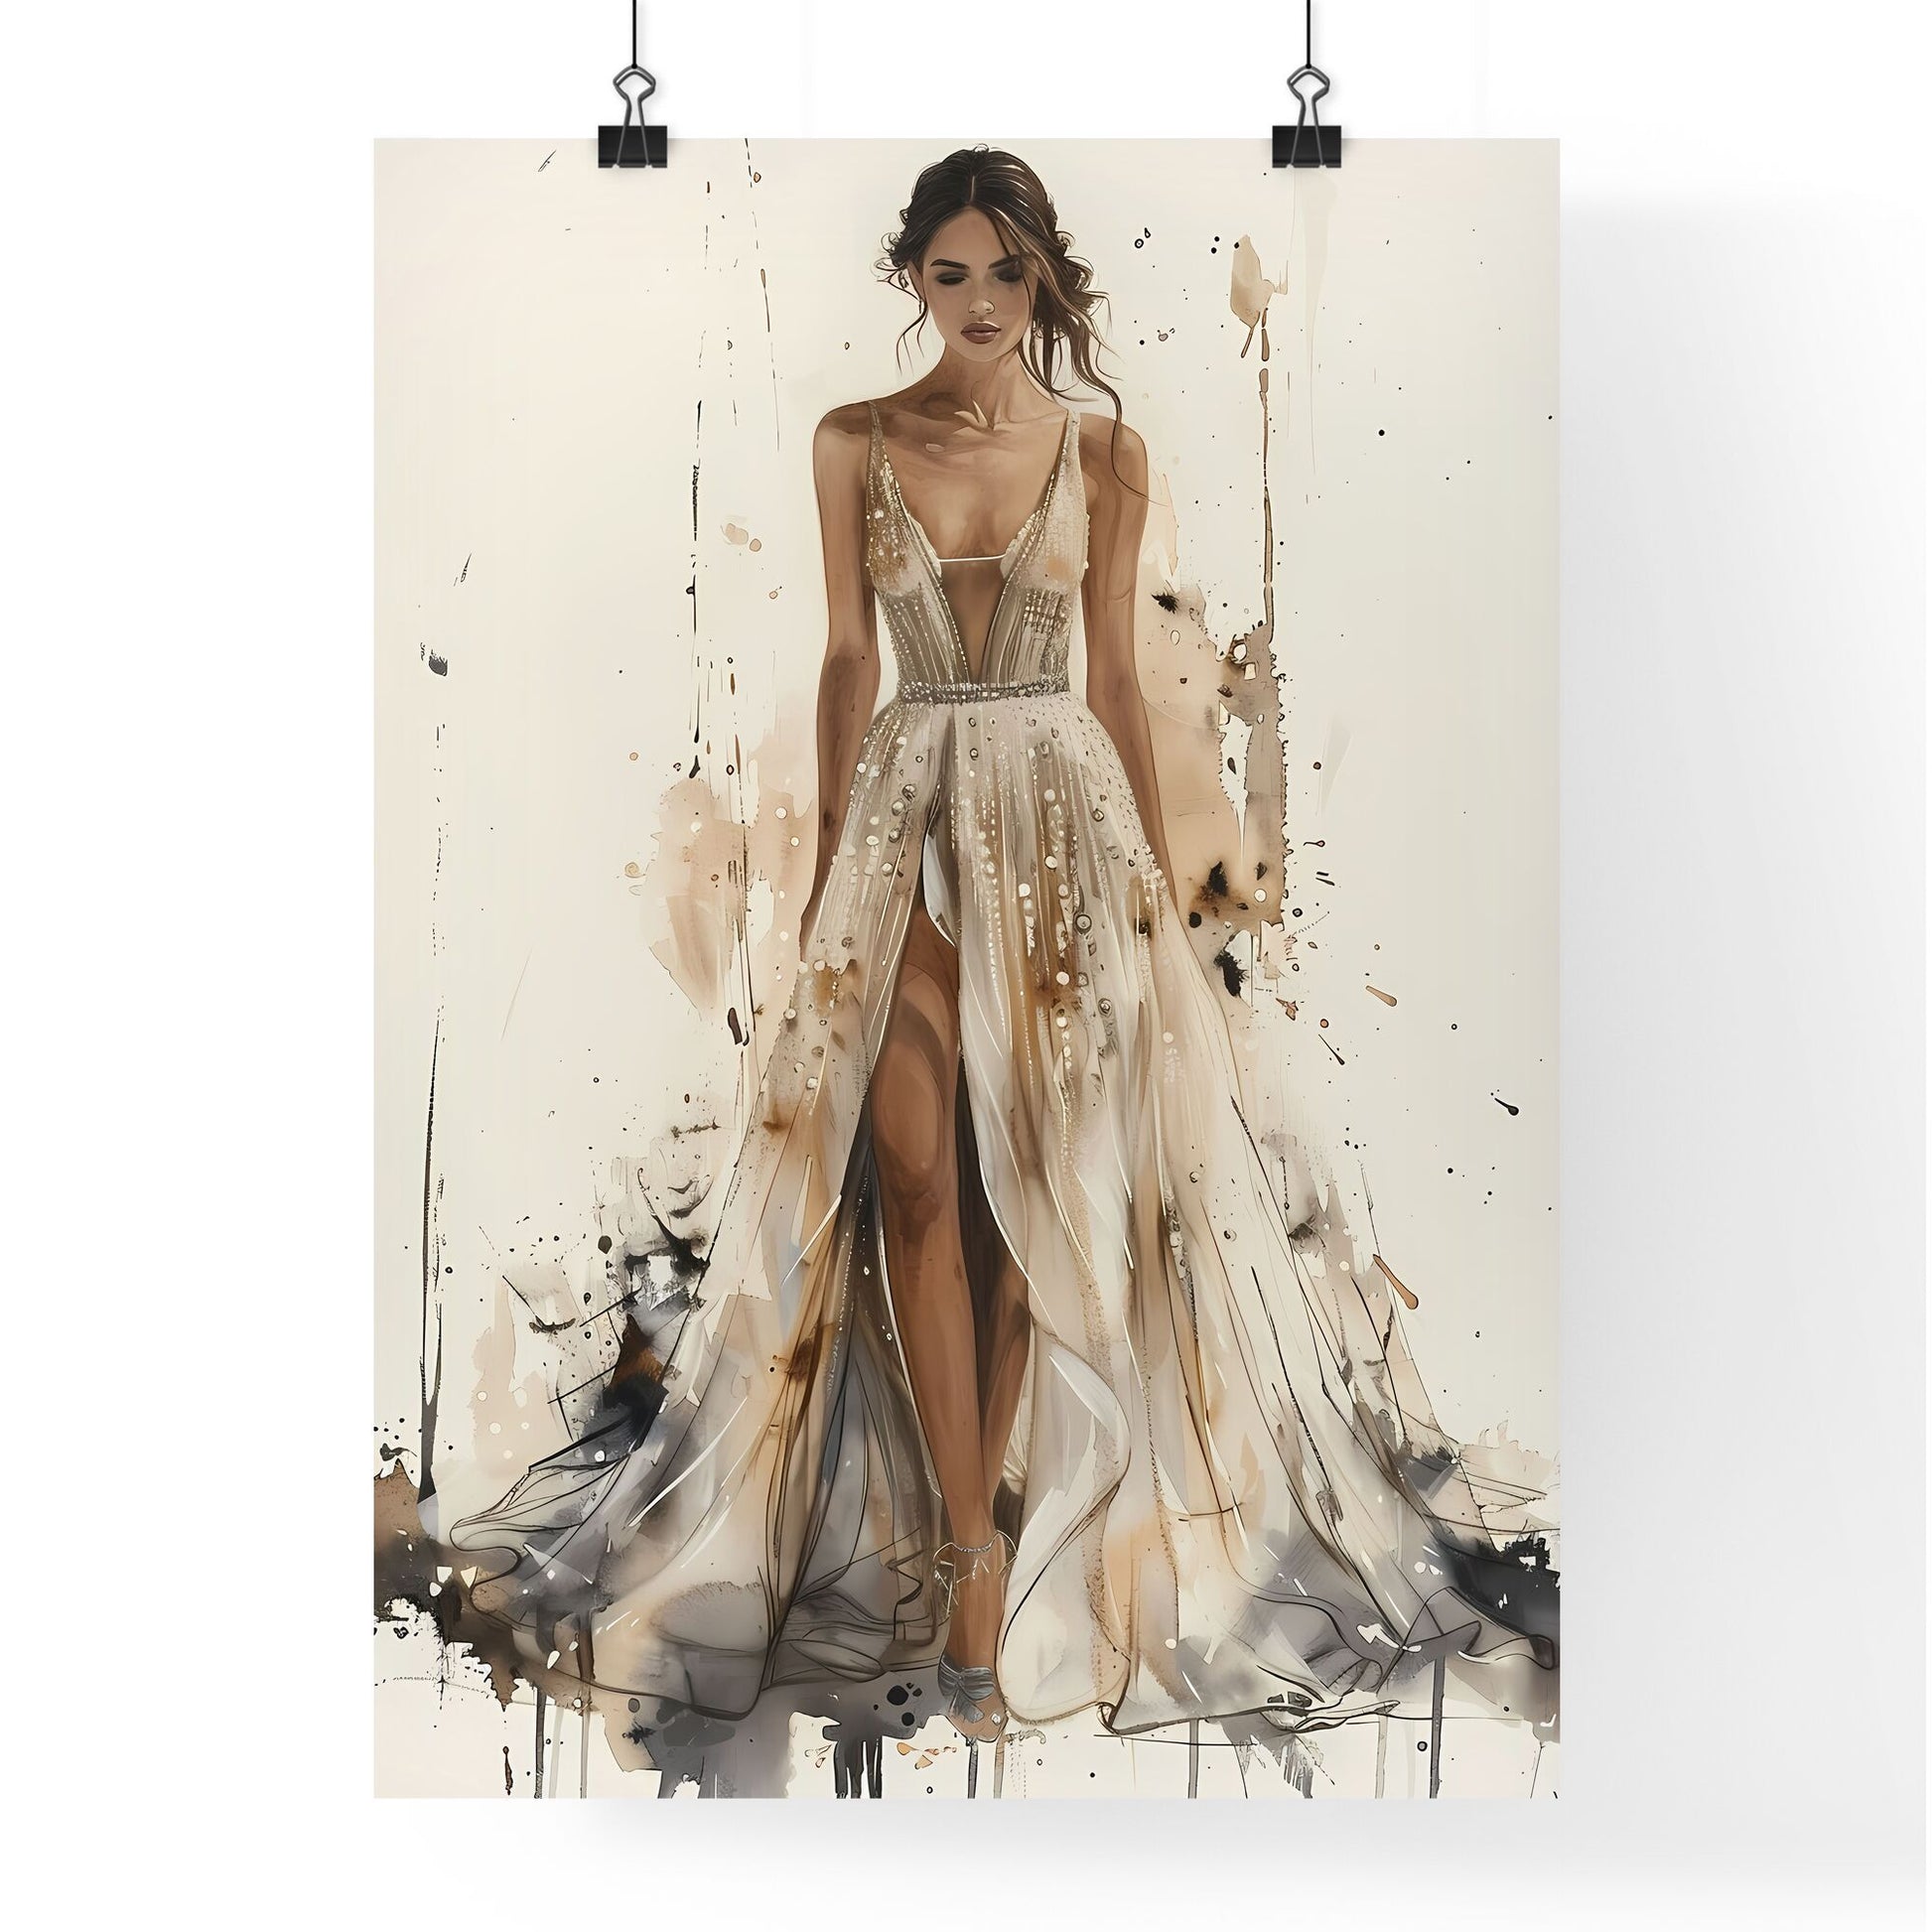 Watercolor Painting of Art Deco Lady in Beaded Gown, Sheer Train and Sparkly Heels Default Title